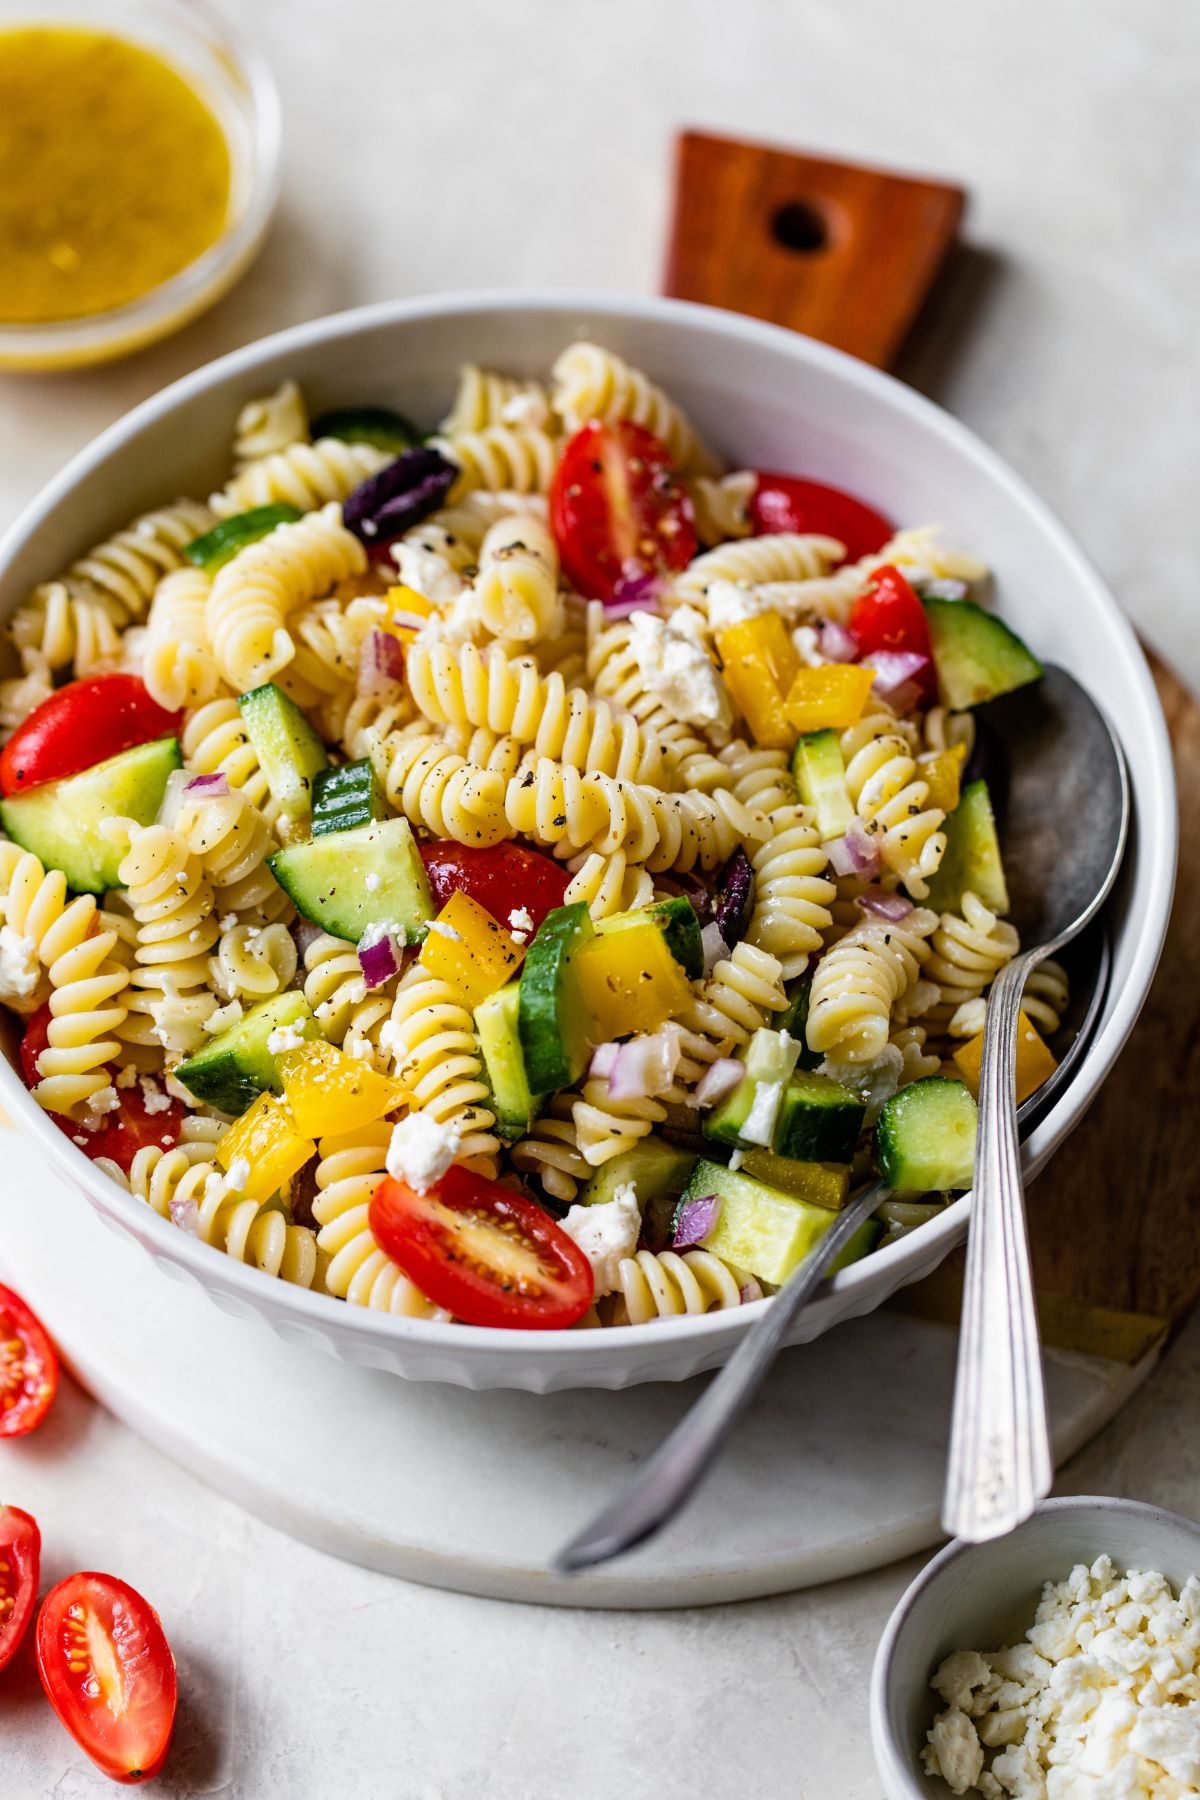 Pasta salad with tomatoes, cucumbers and bell pepper.